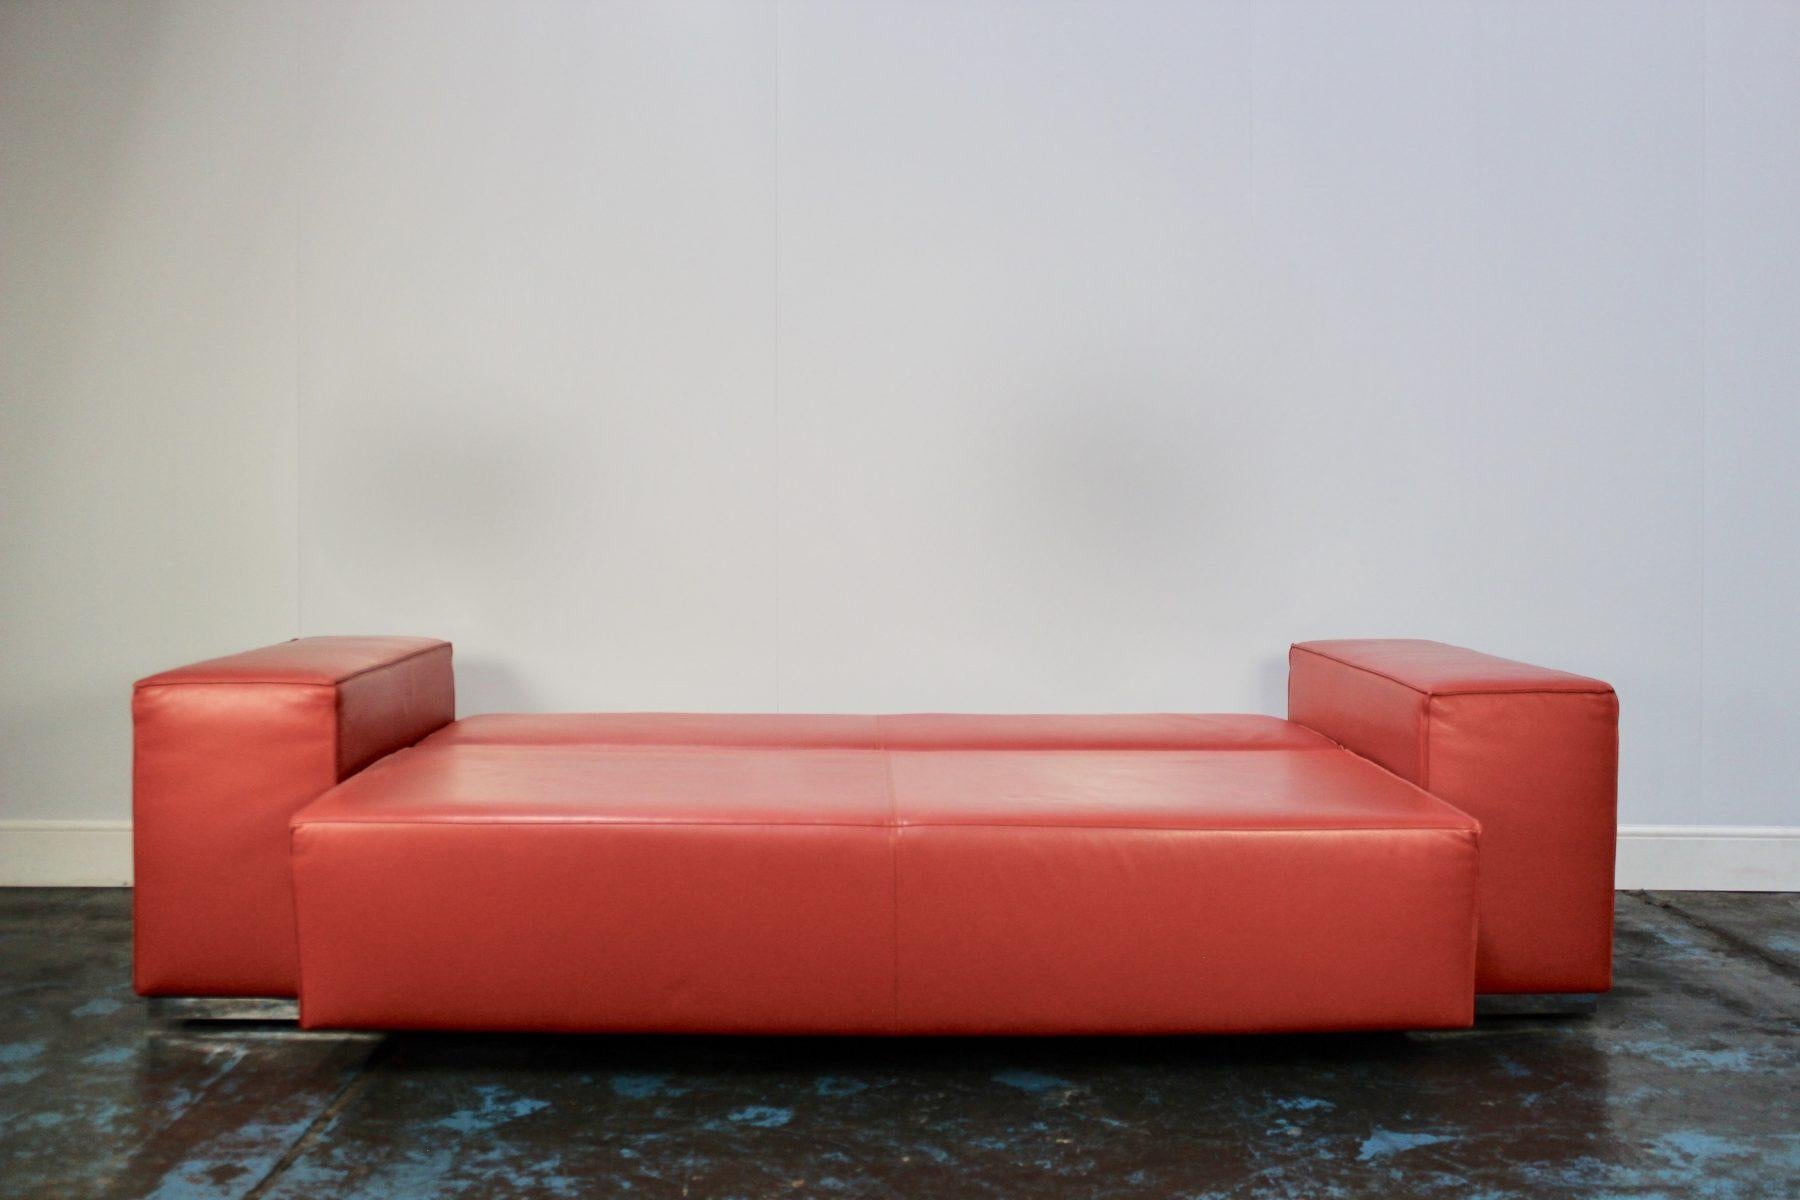 Contemporary Cassina “Big Blox” 3-Seat Sofa Bed in Deep Red Leather